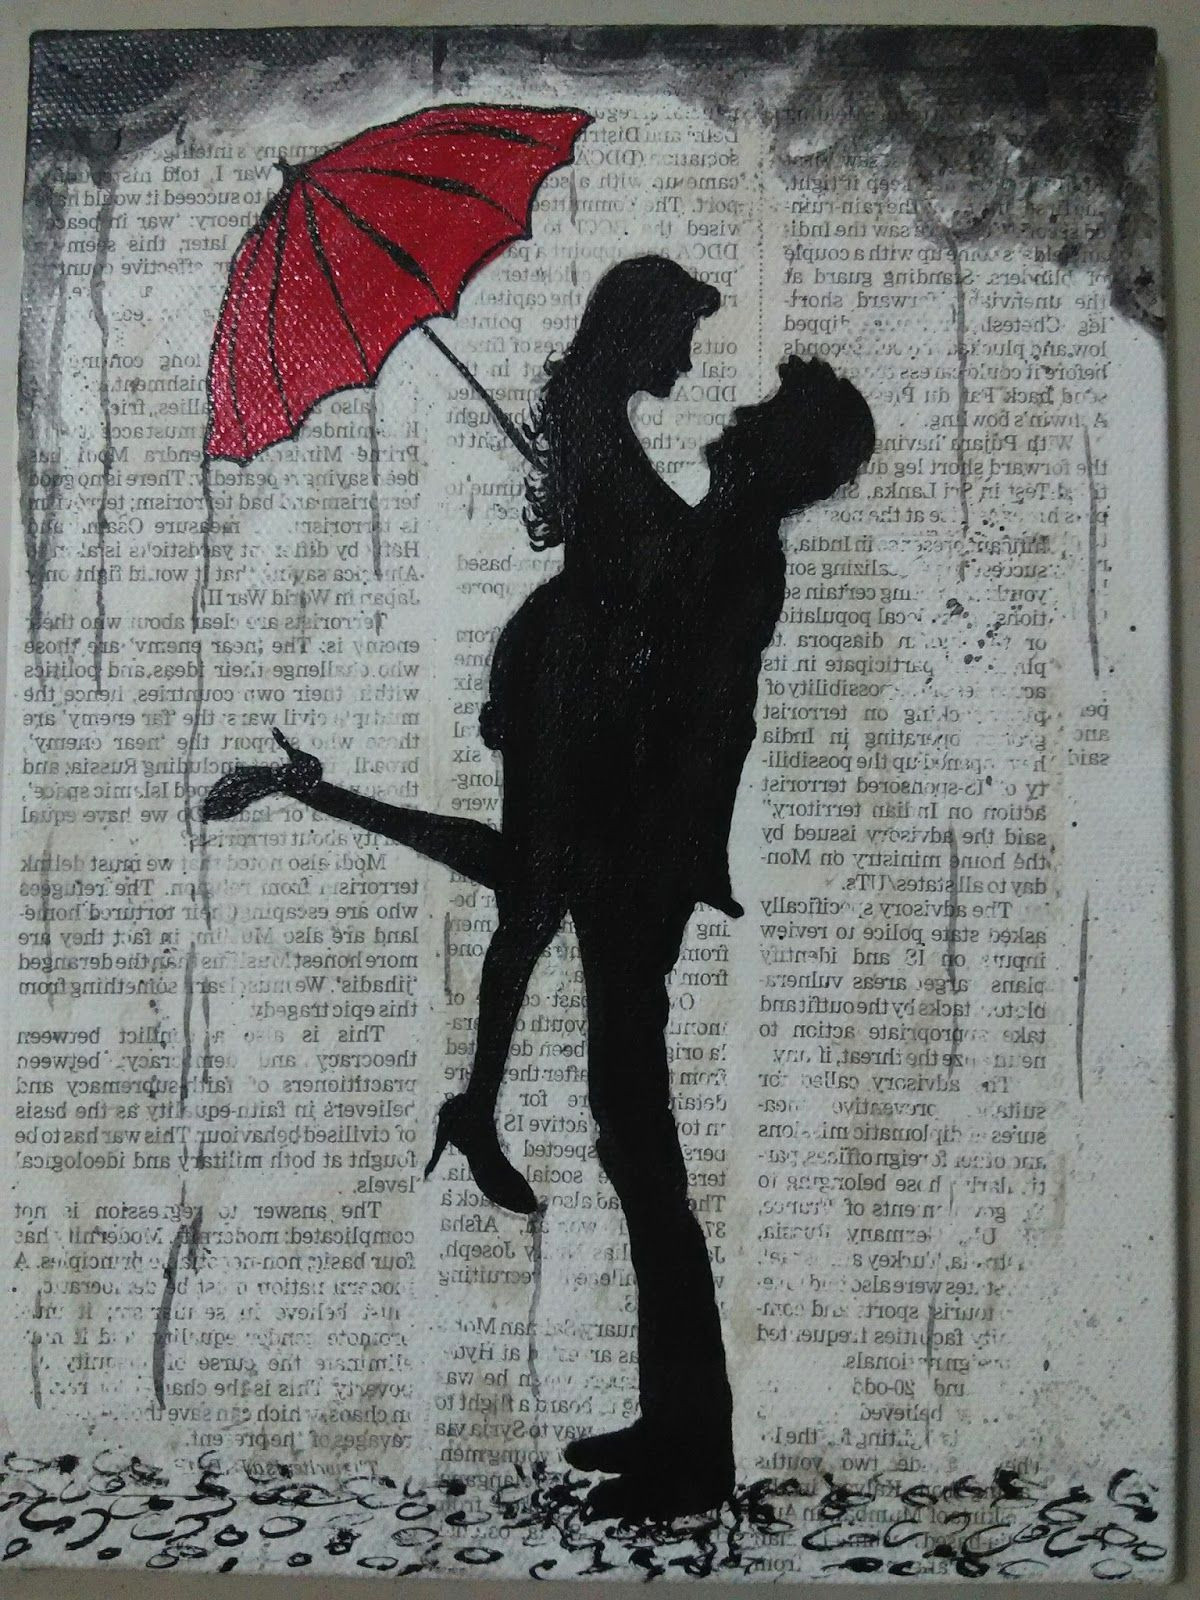 Drawing Of Girl Under Umbrella Pin by Svgproclub On We Love Art In 2019 Pinterest Drawings Art